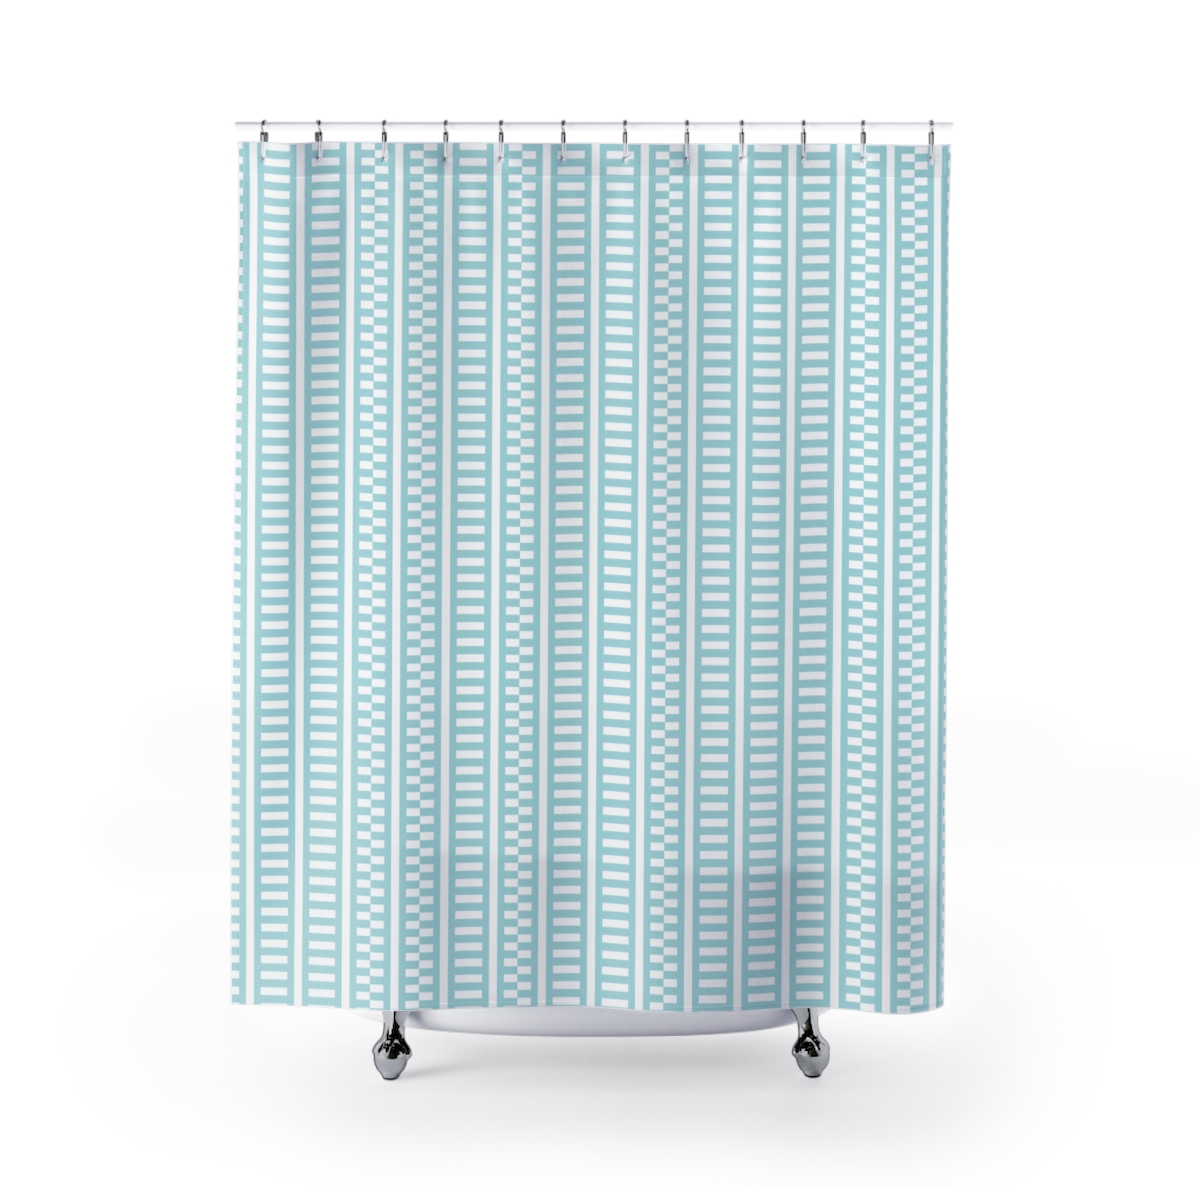 Blue and White Shower Curtain (Shifted Stripes)